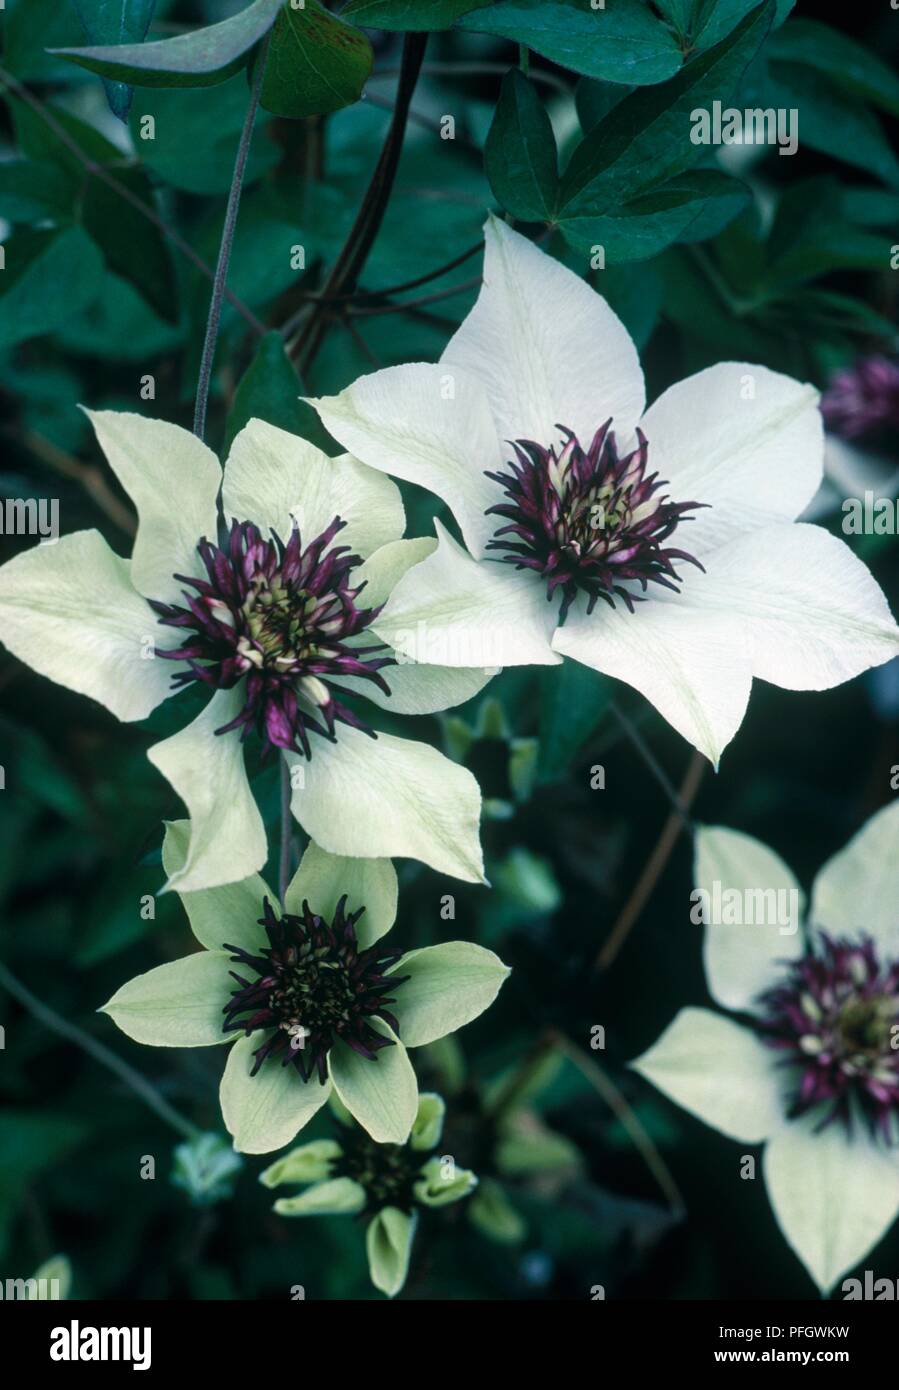 White and purple flowers from Clematis florida 'Sieboldii' Stock Photo